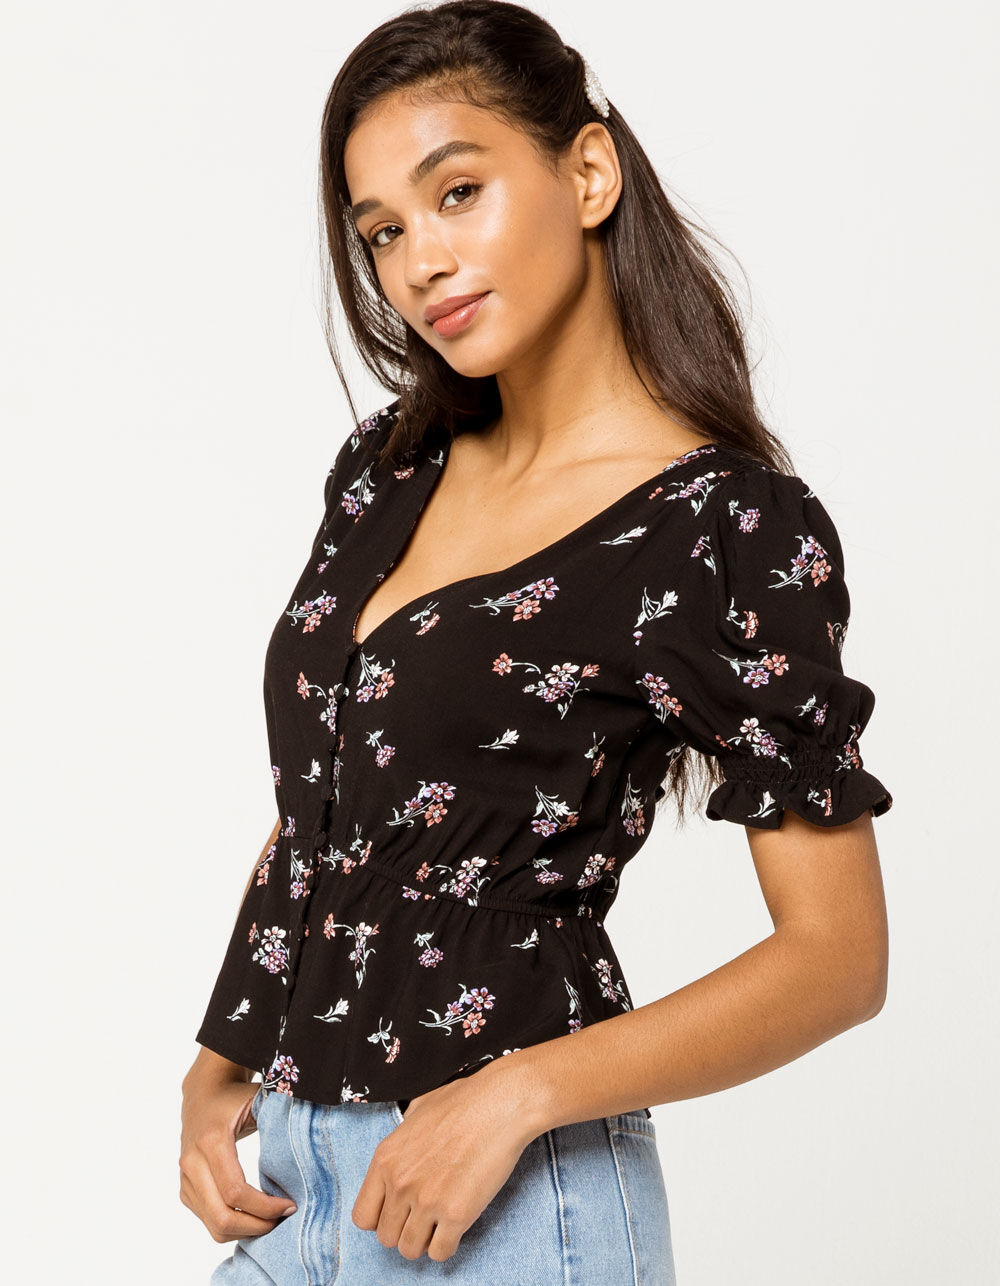 MIMI CHICA Button Front Peplum Womens Peasant Top - BLACK COMBO | Tillys